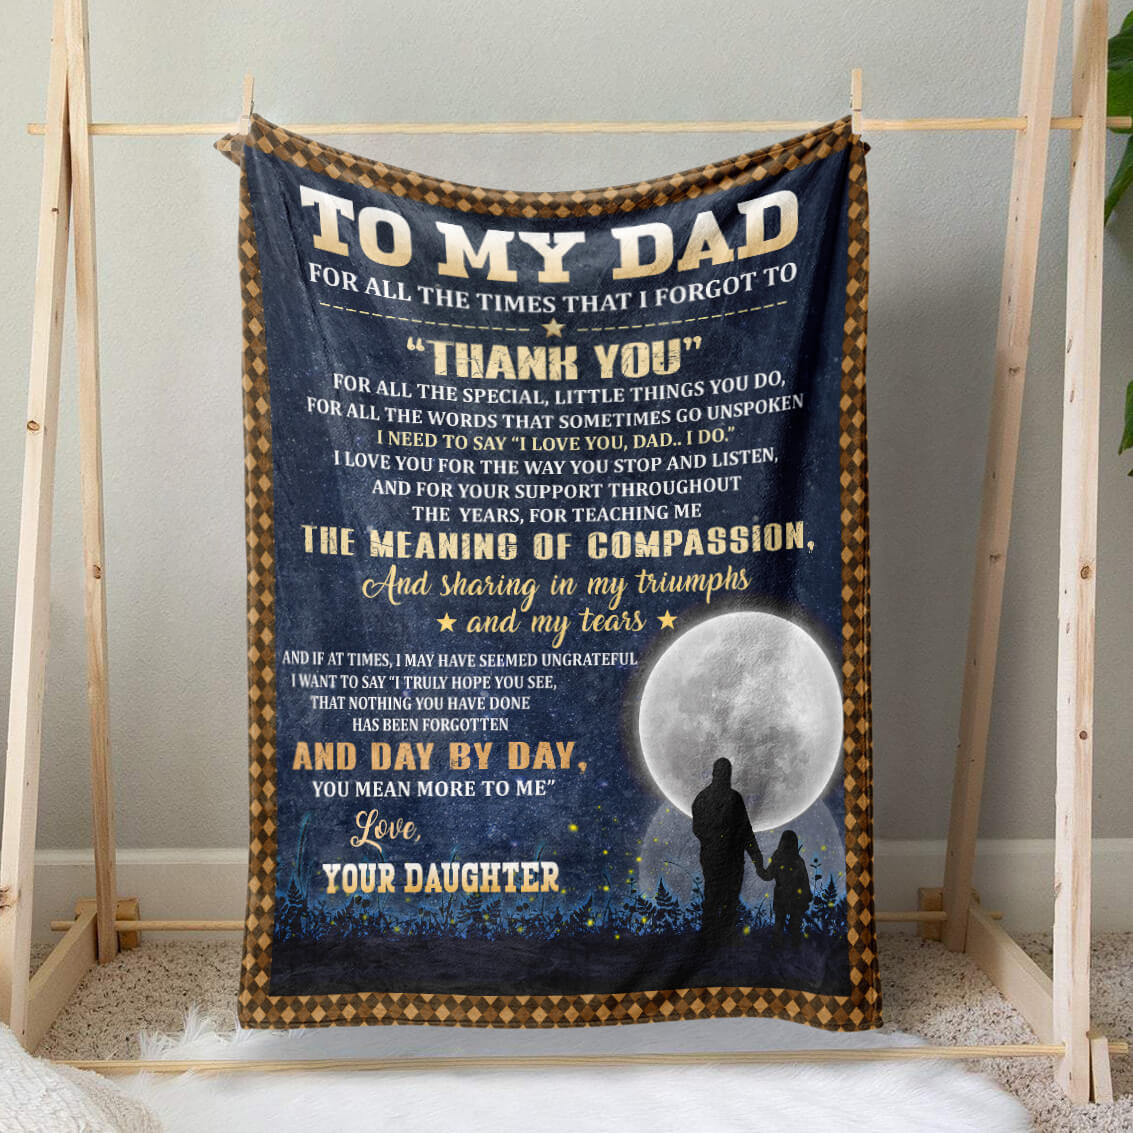 I Forgot To Thank You Dad Blanket Gift, I Love You Dad from Daughter Blanket